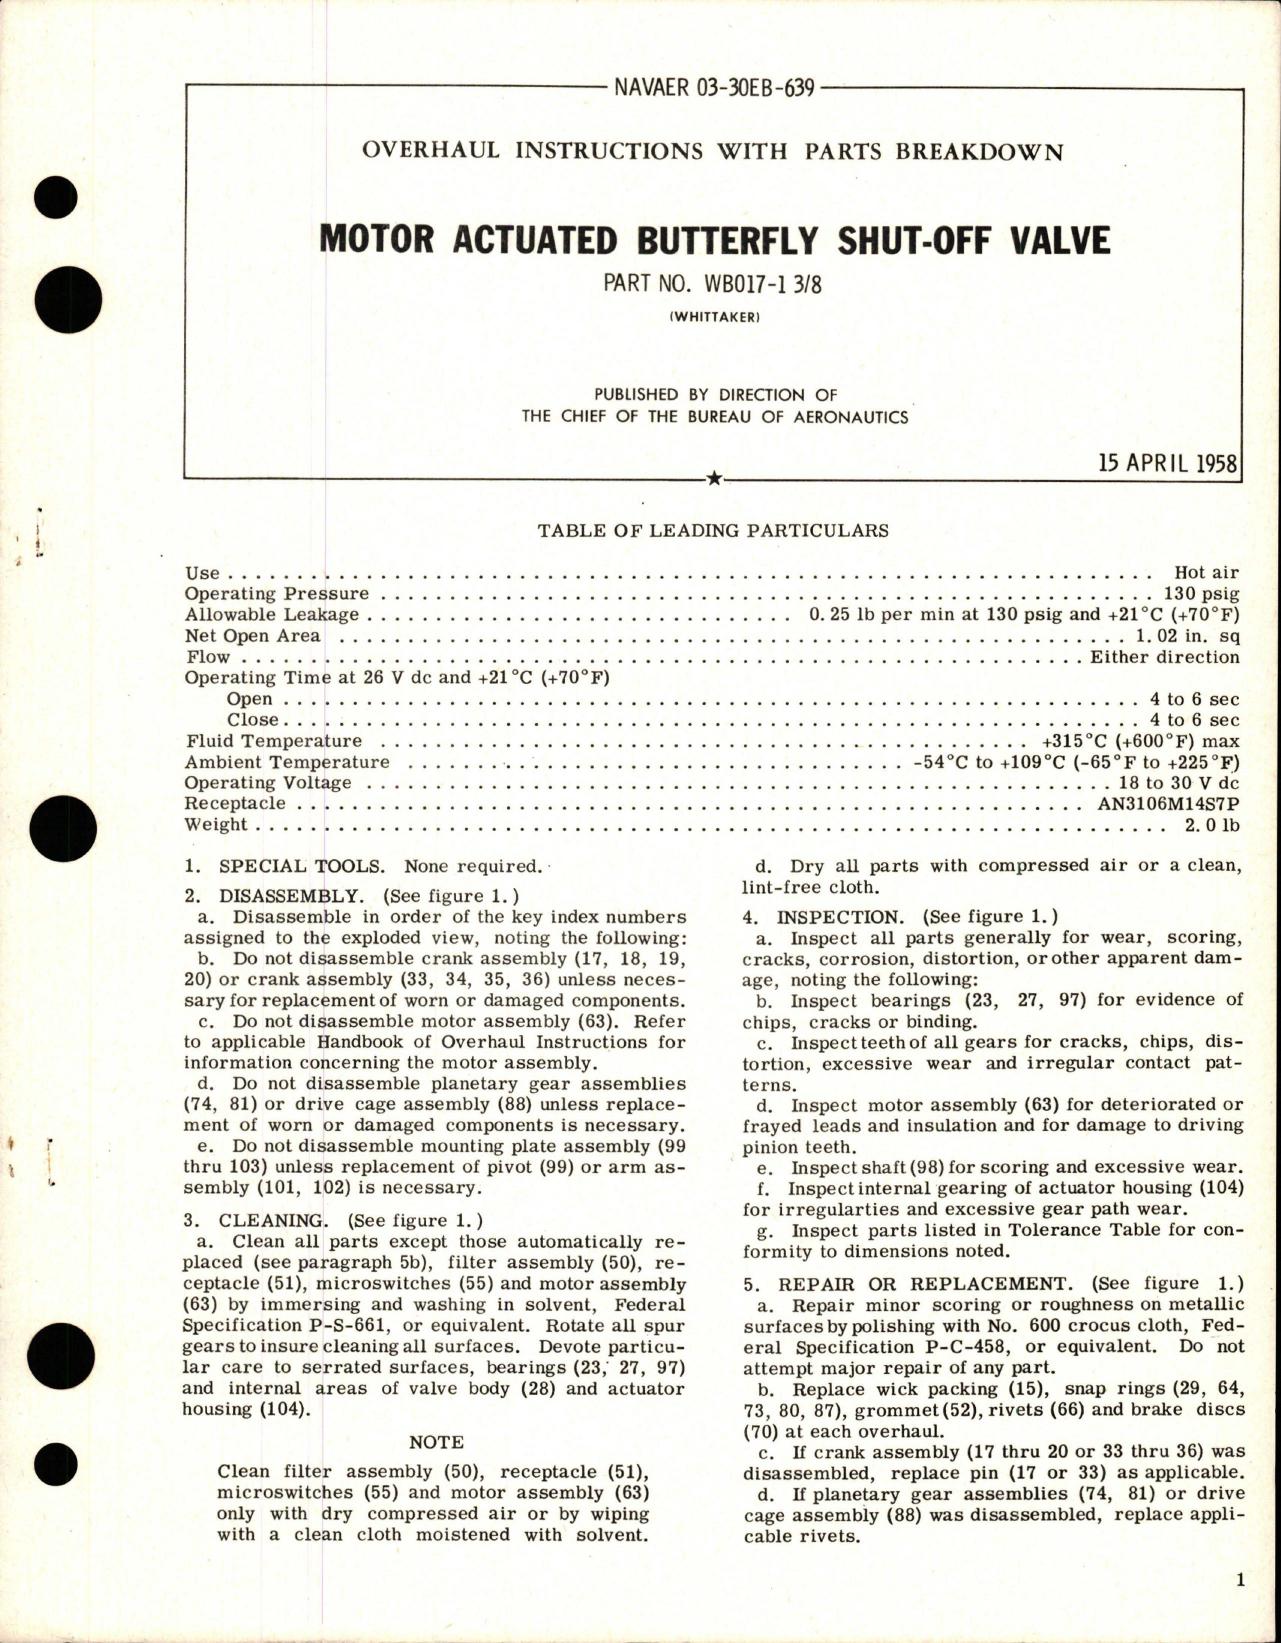 Sample page 1 from AirCorps Library document: Overhaul Instructions with Parts Breakdown for Motor Actuated Butterfly Shut-Off Valve - Part WB017-1 3/8